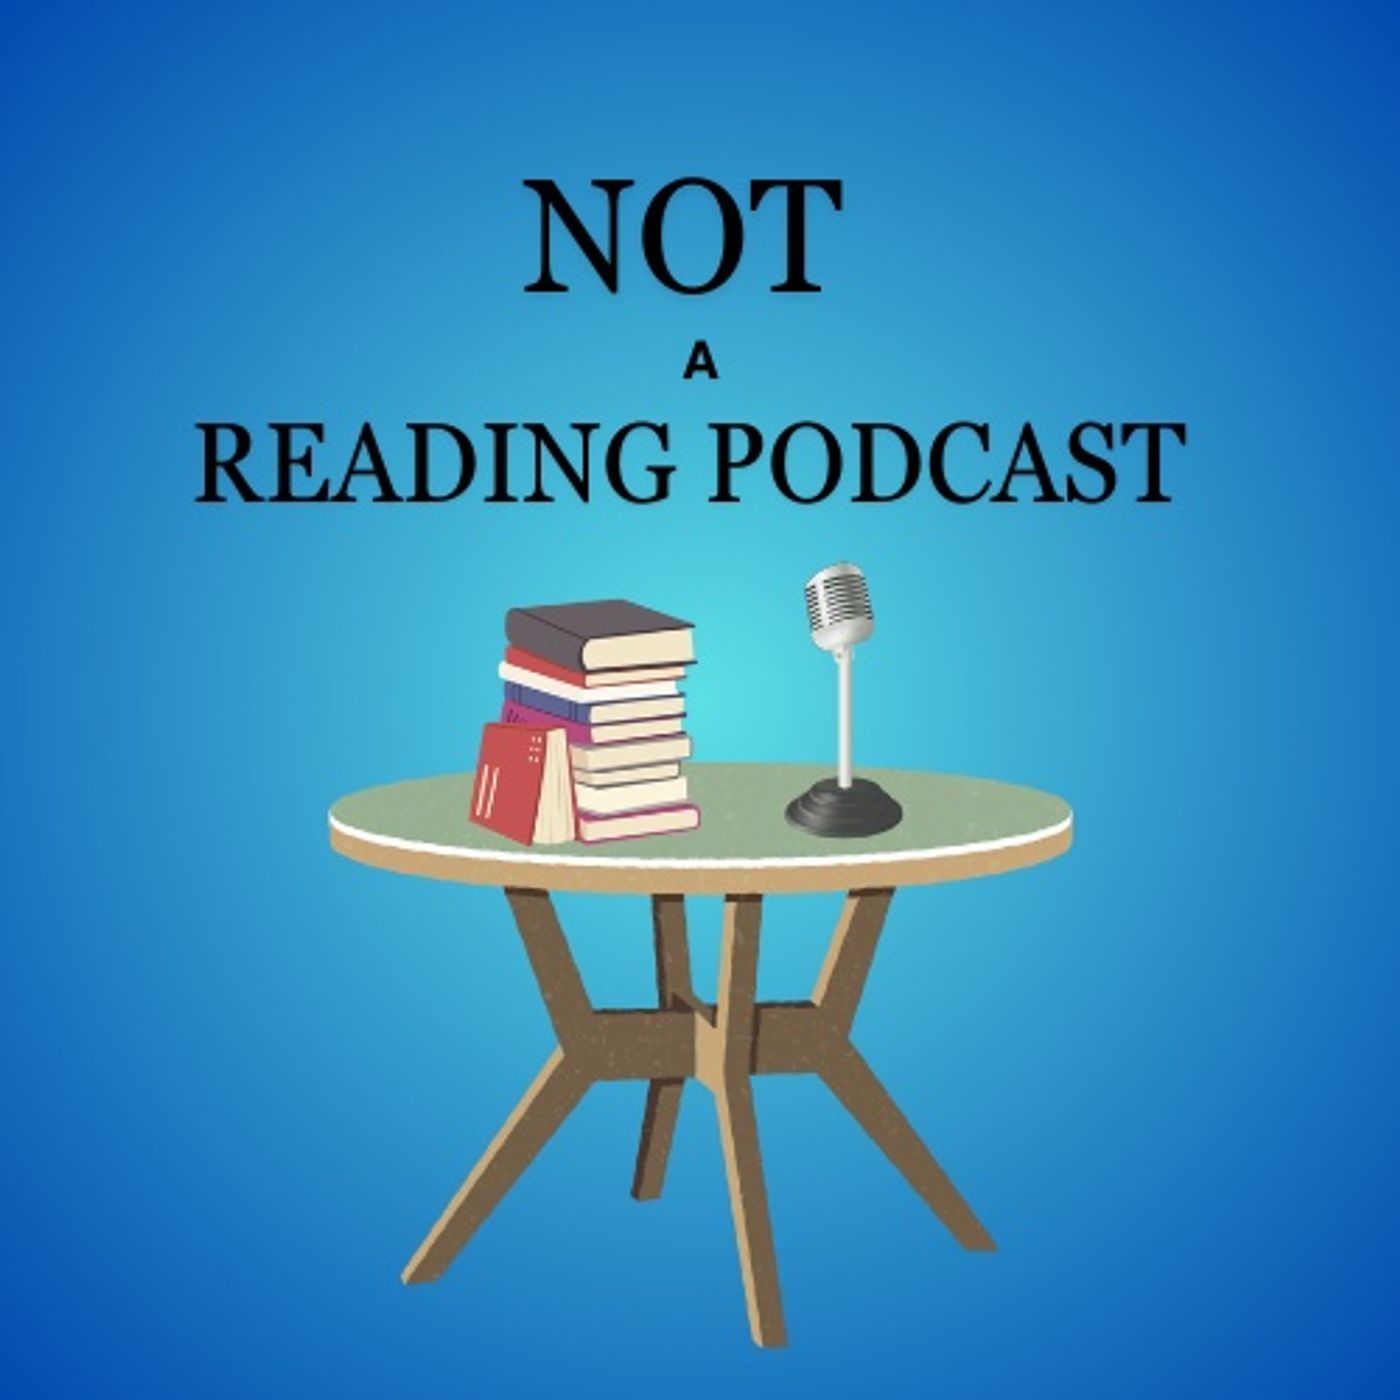 Not a Reading Podcast